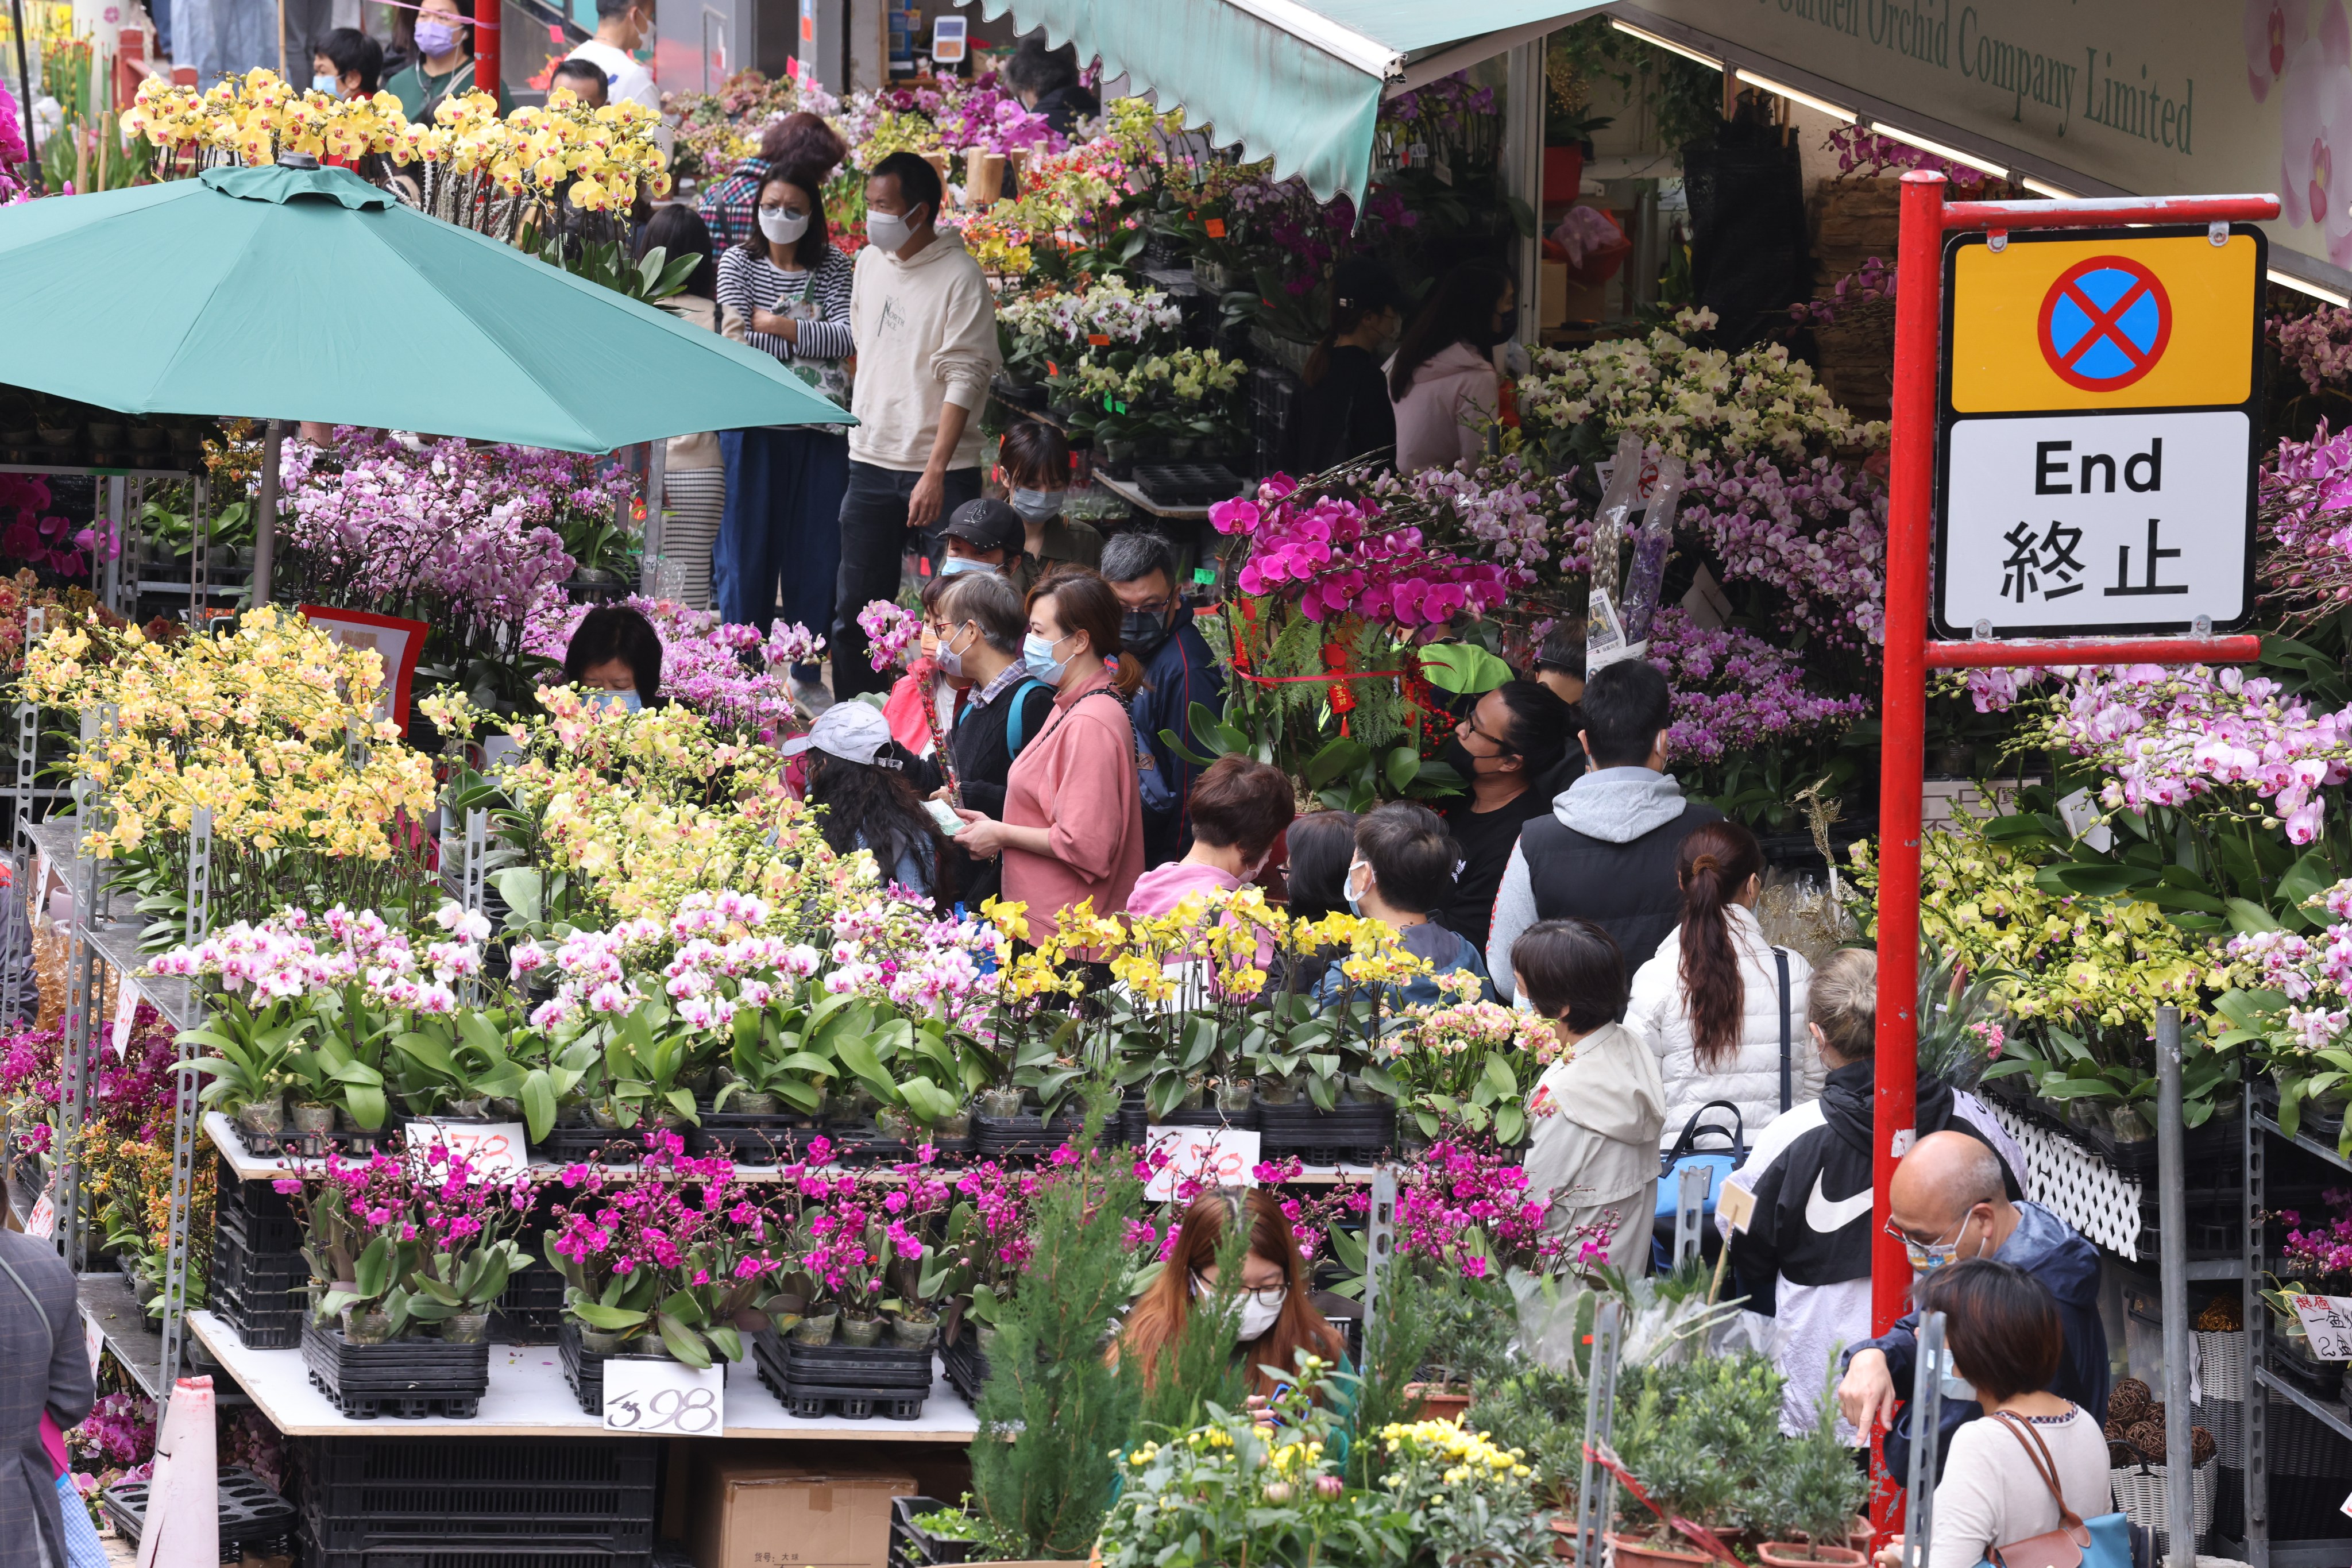 The flower market is one of the most vibrant spots in Hong Kong. Photo: Nora Tam